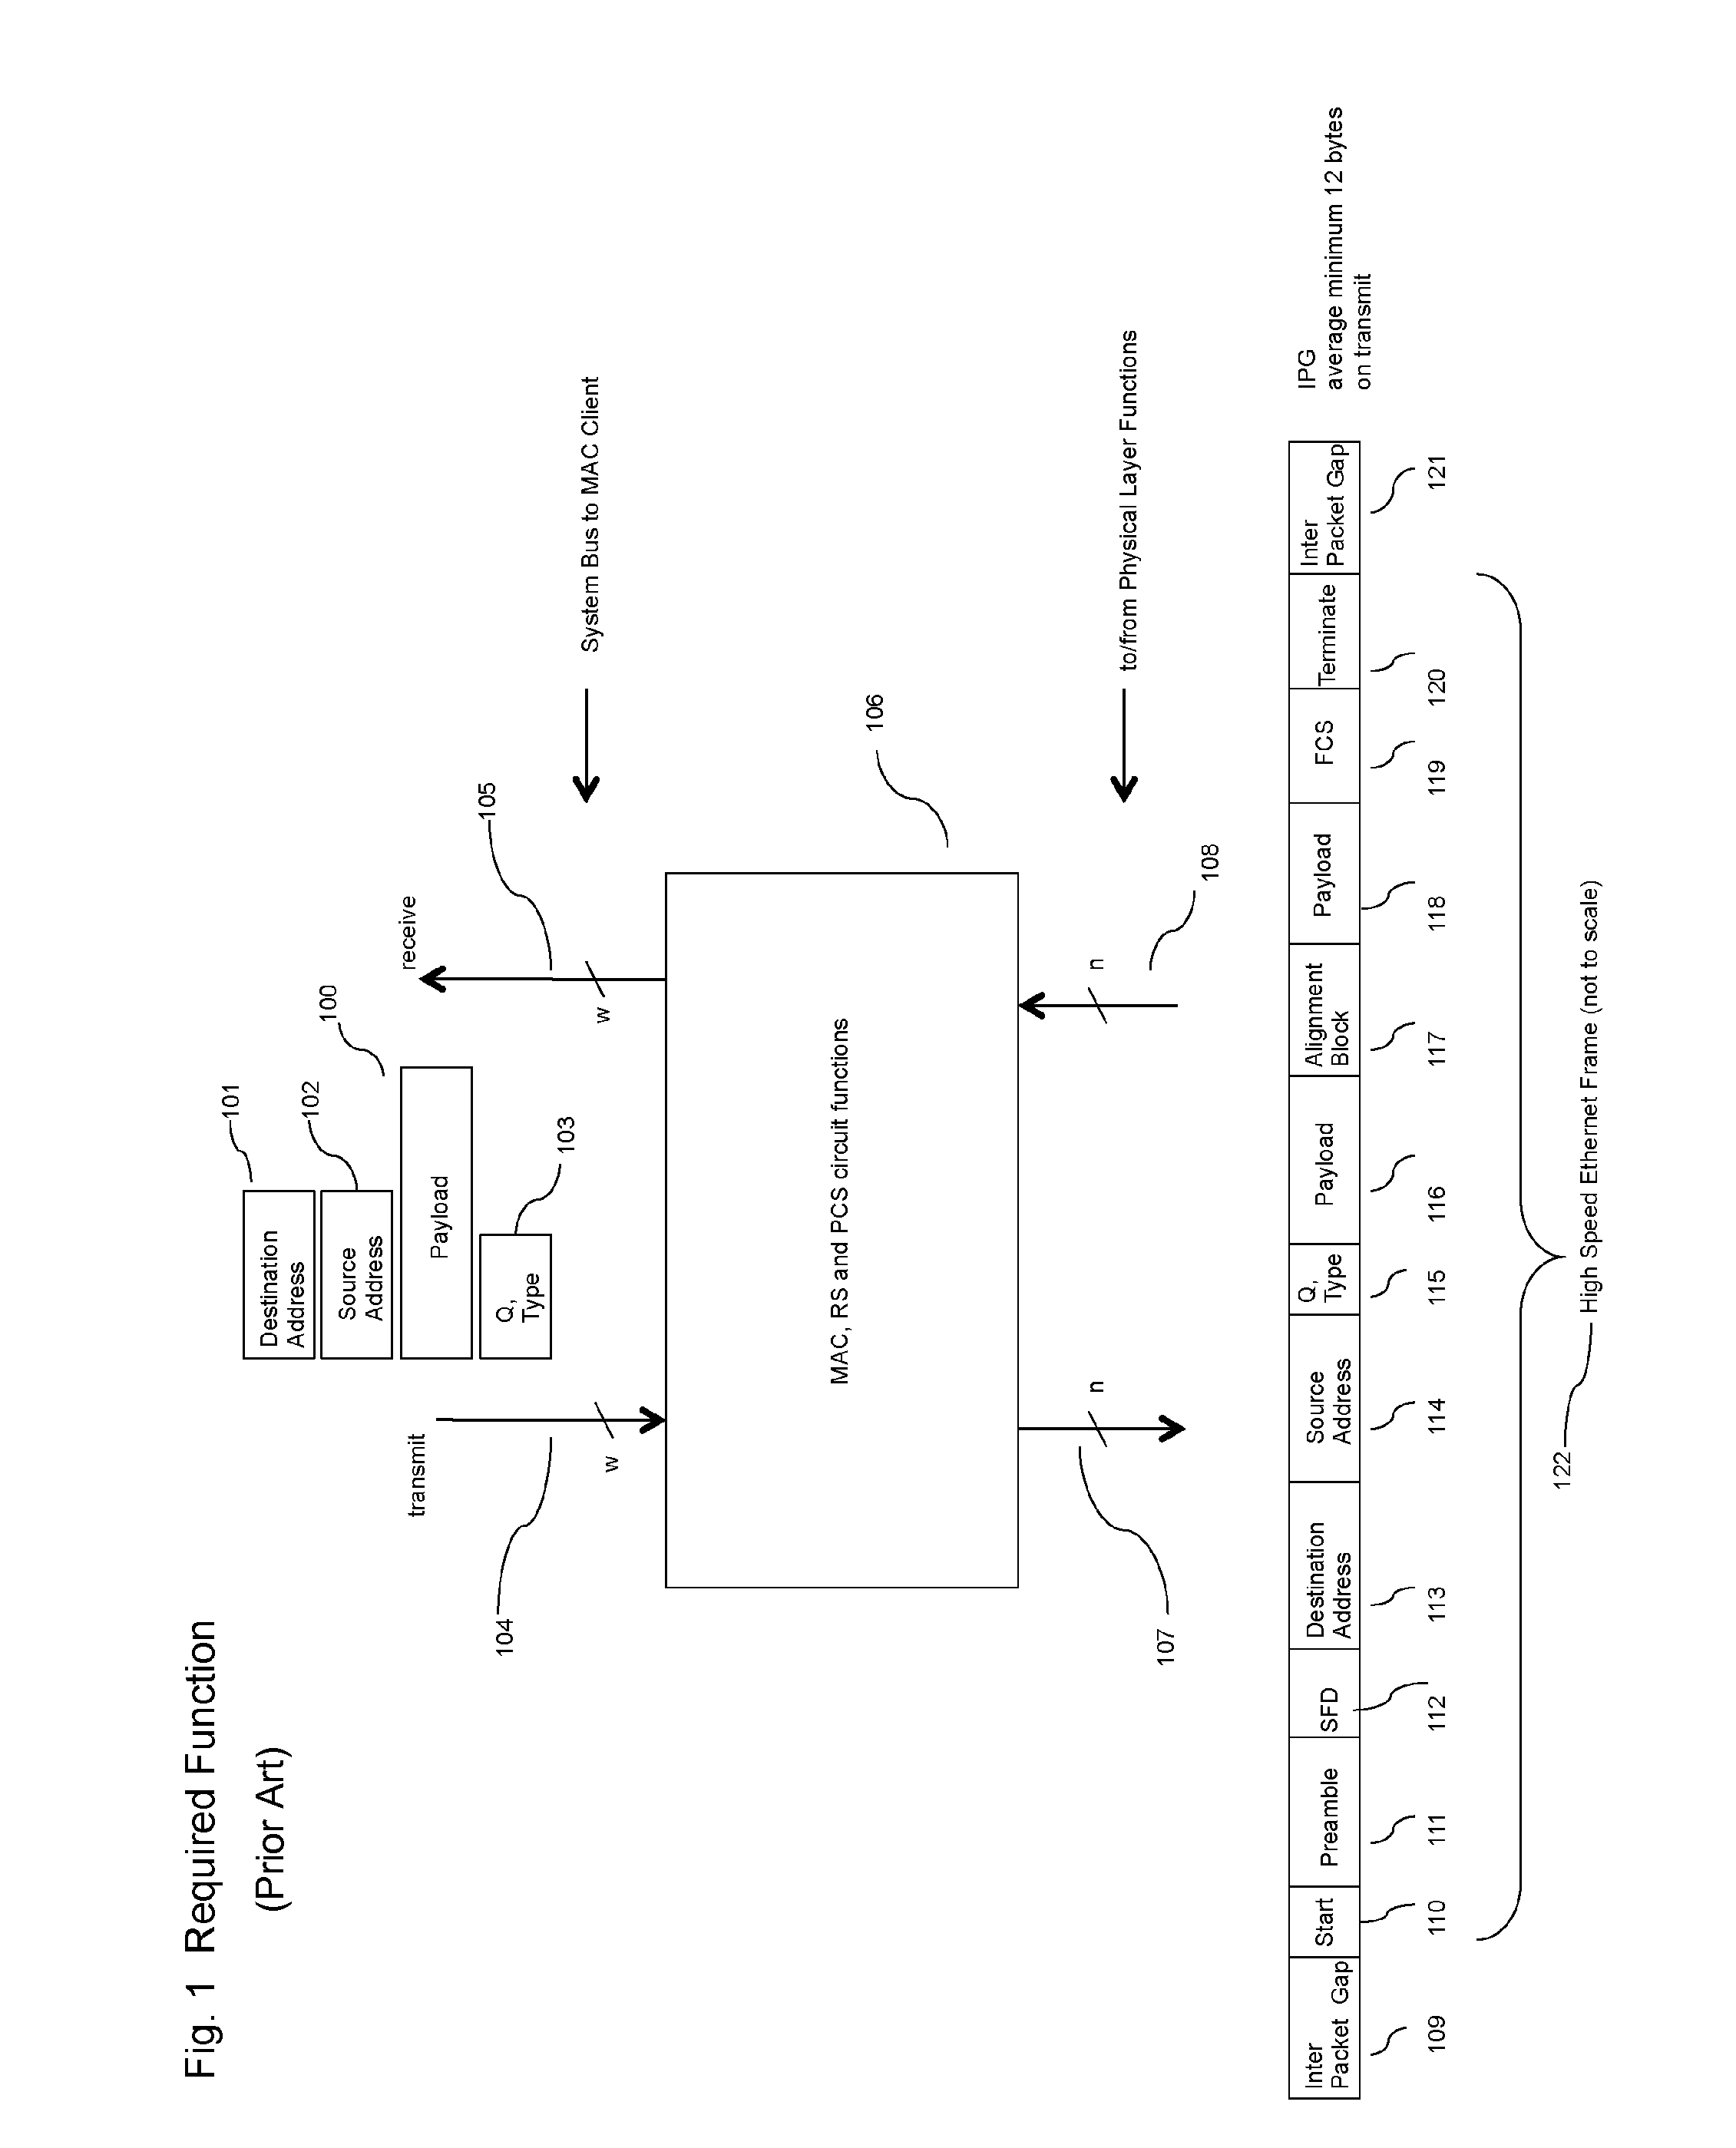 Packet network interface apparatus and method